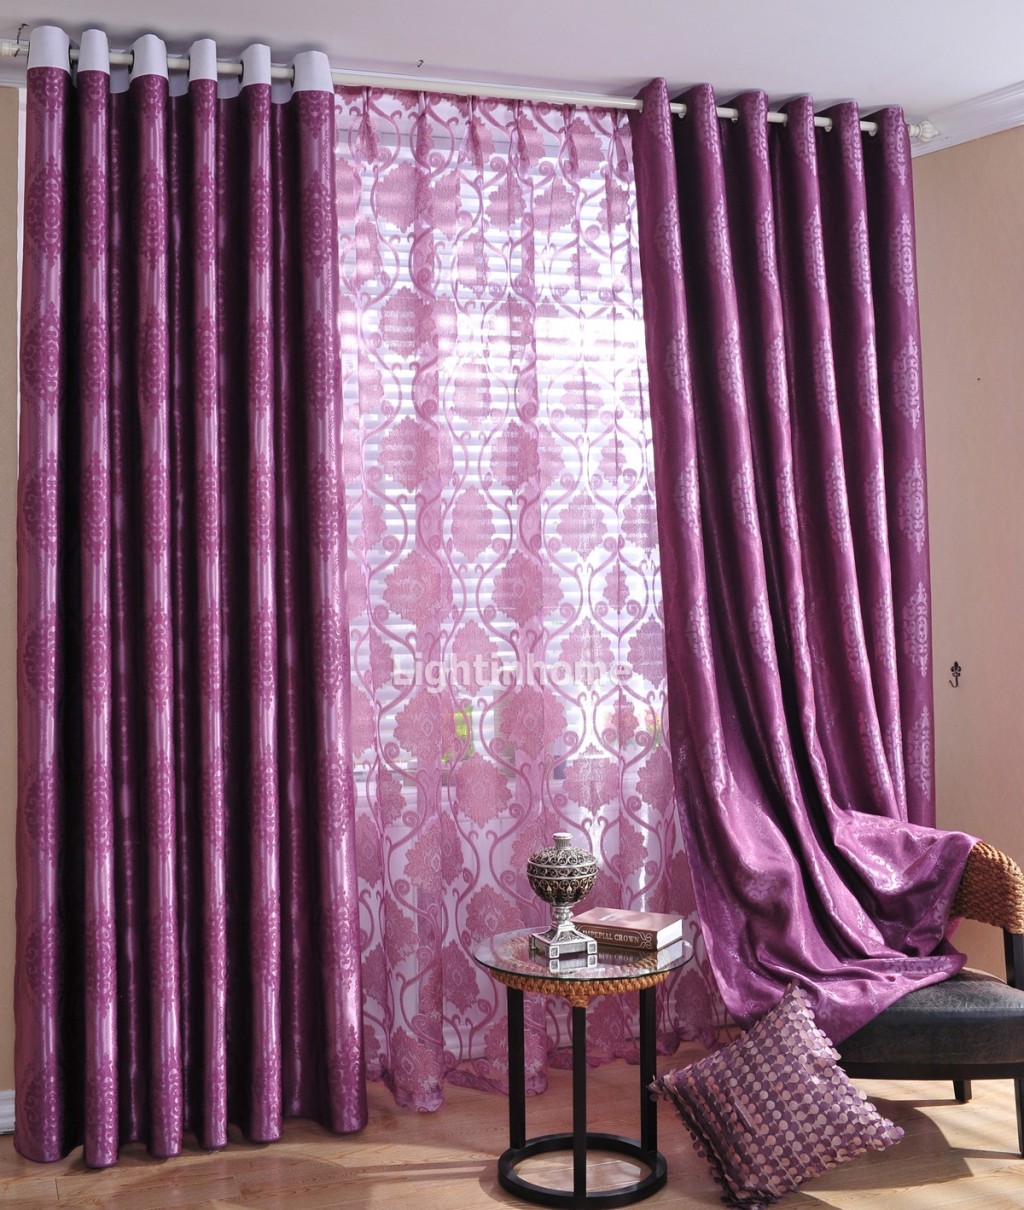 Patterned Blackout Curtains in Curtain